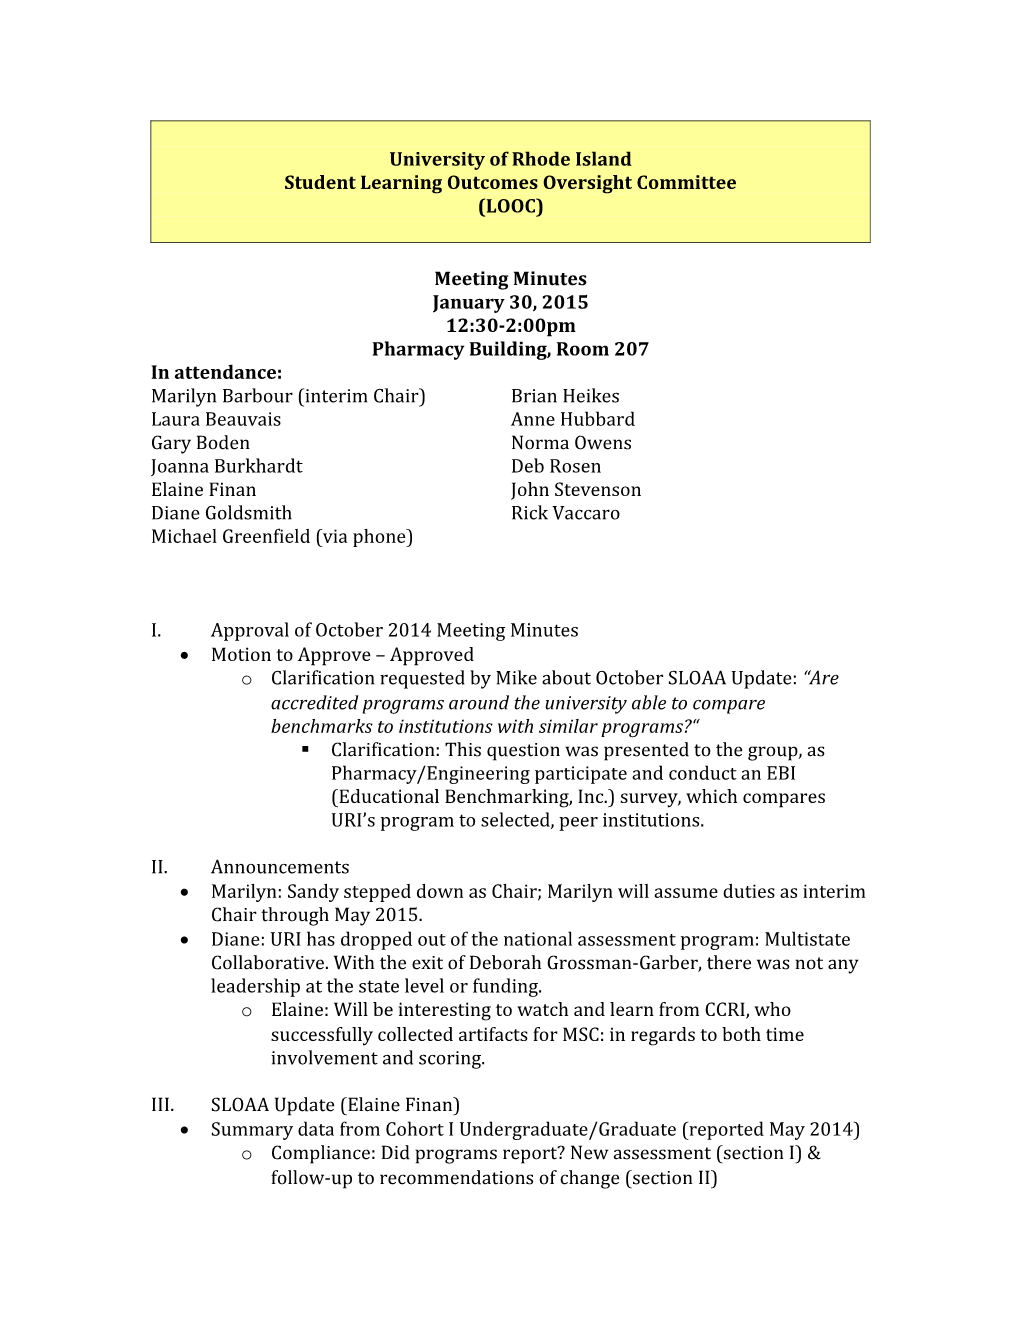 Student Learning Outcomes Oversight Committee s1